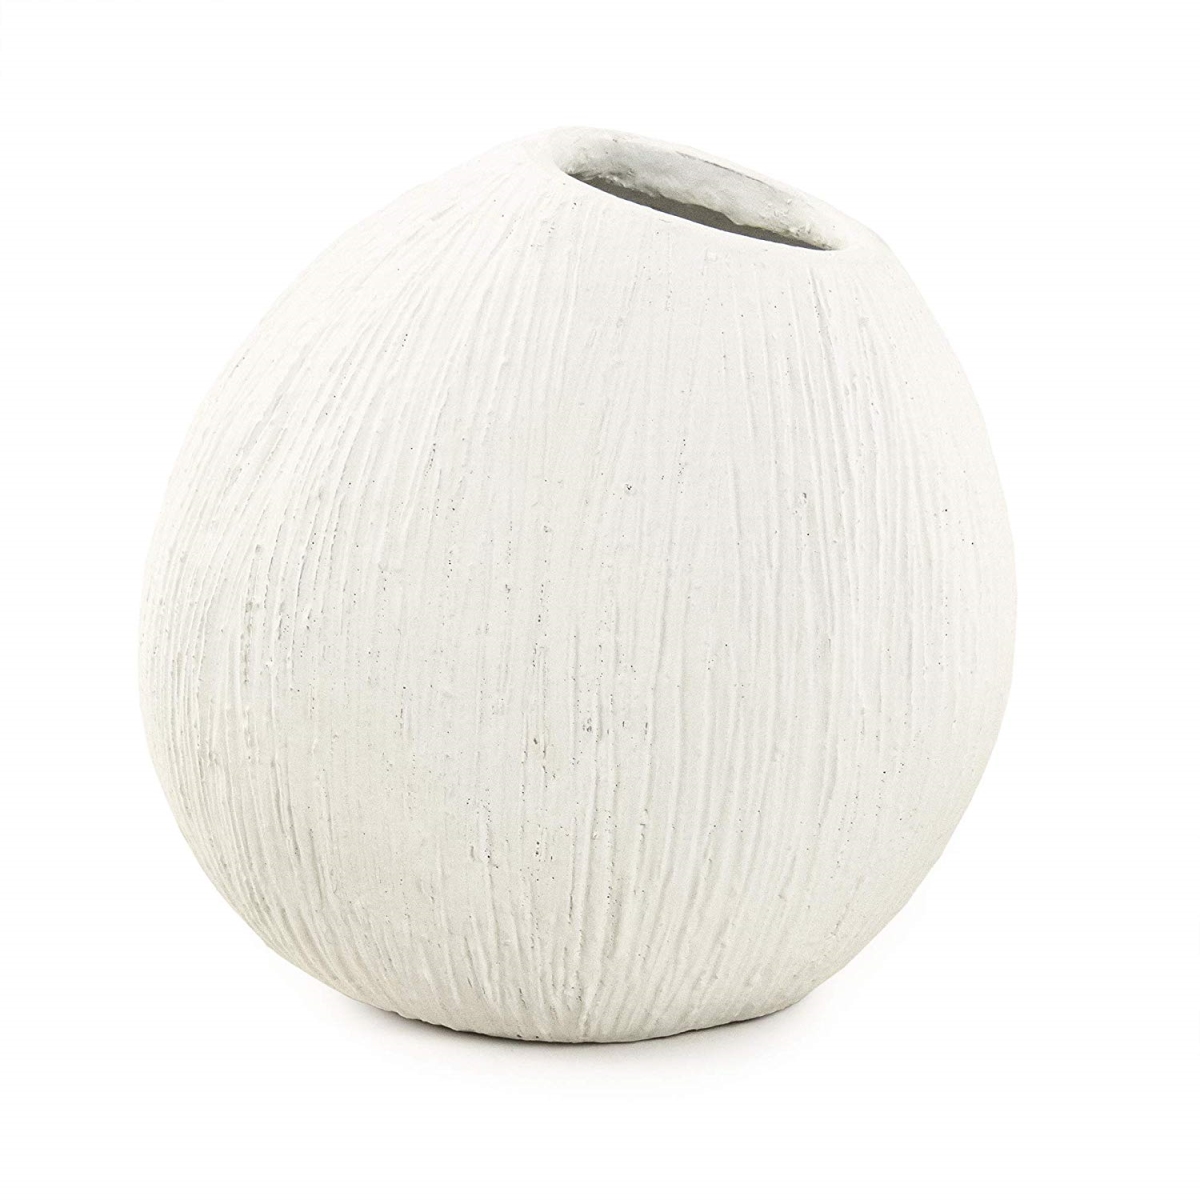 10045s A148 Distressed Vase, Small - White